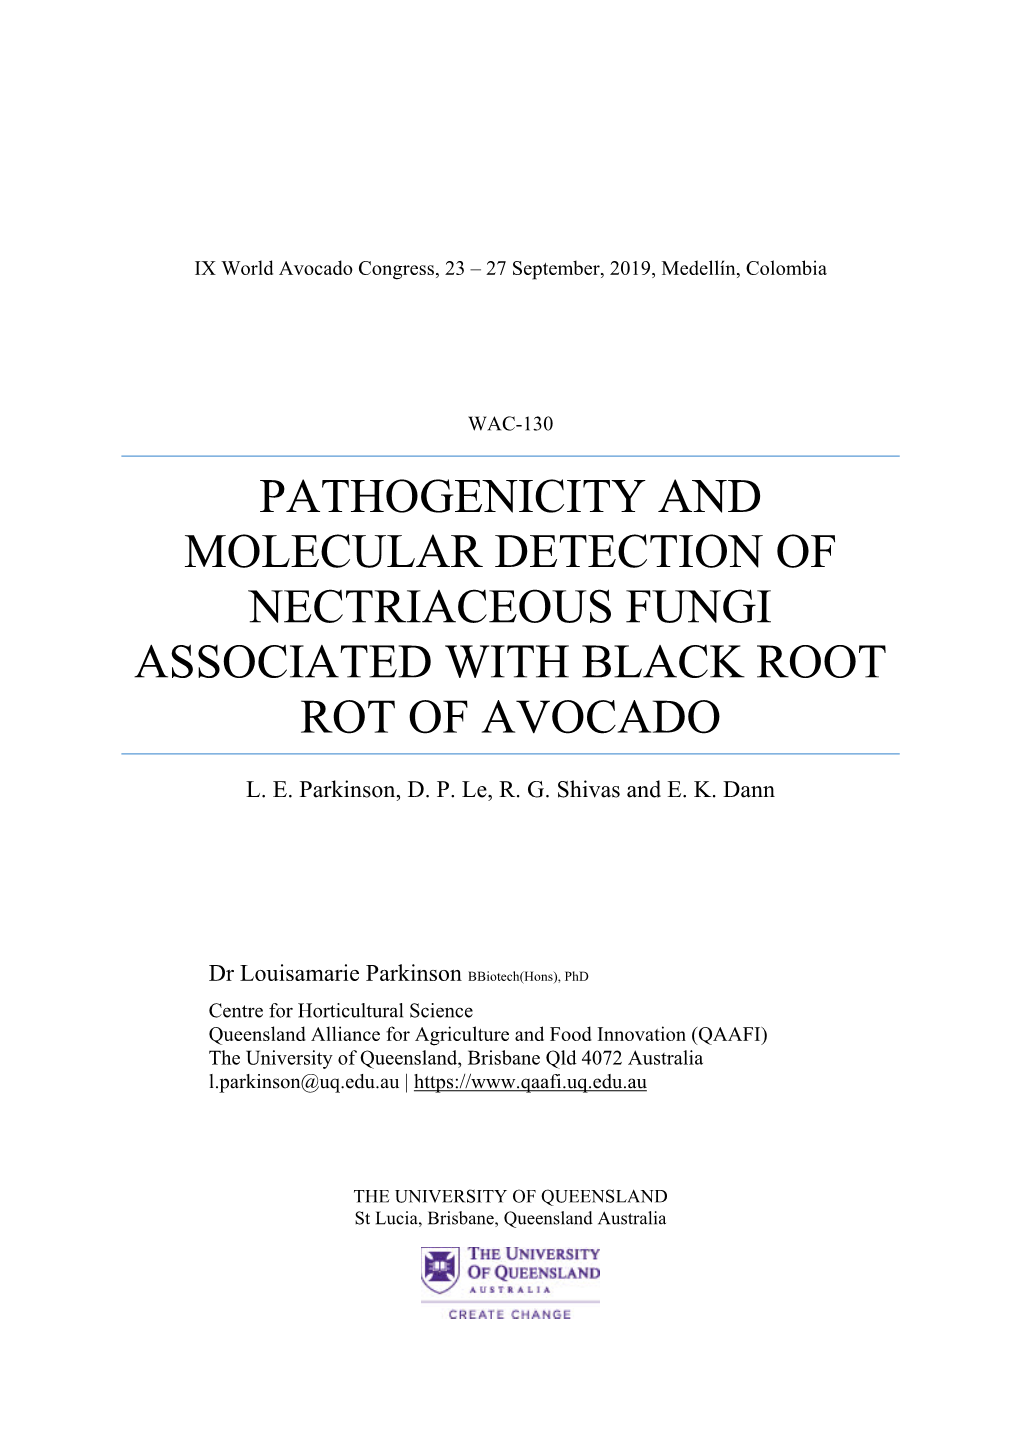 Pathogenicity and Molecular Detection of Nectriaceous Fungi Associated with Black Root Rot of Avocado